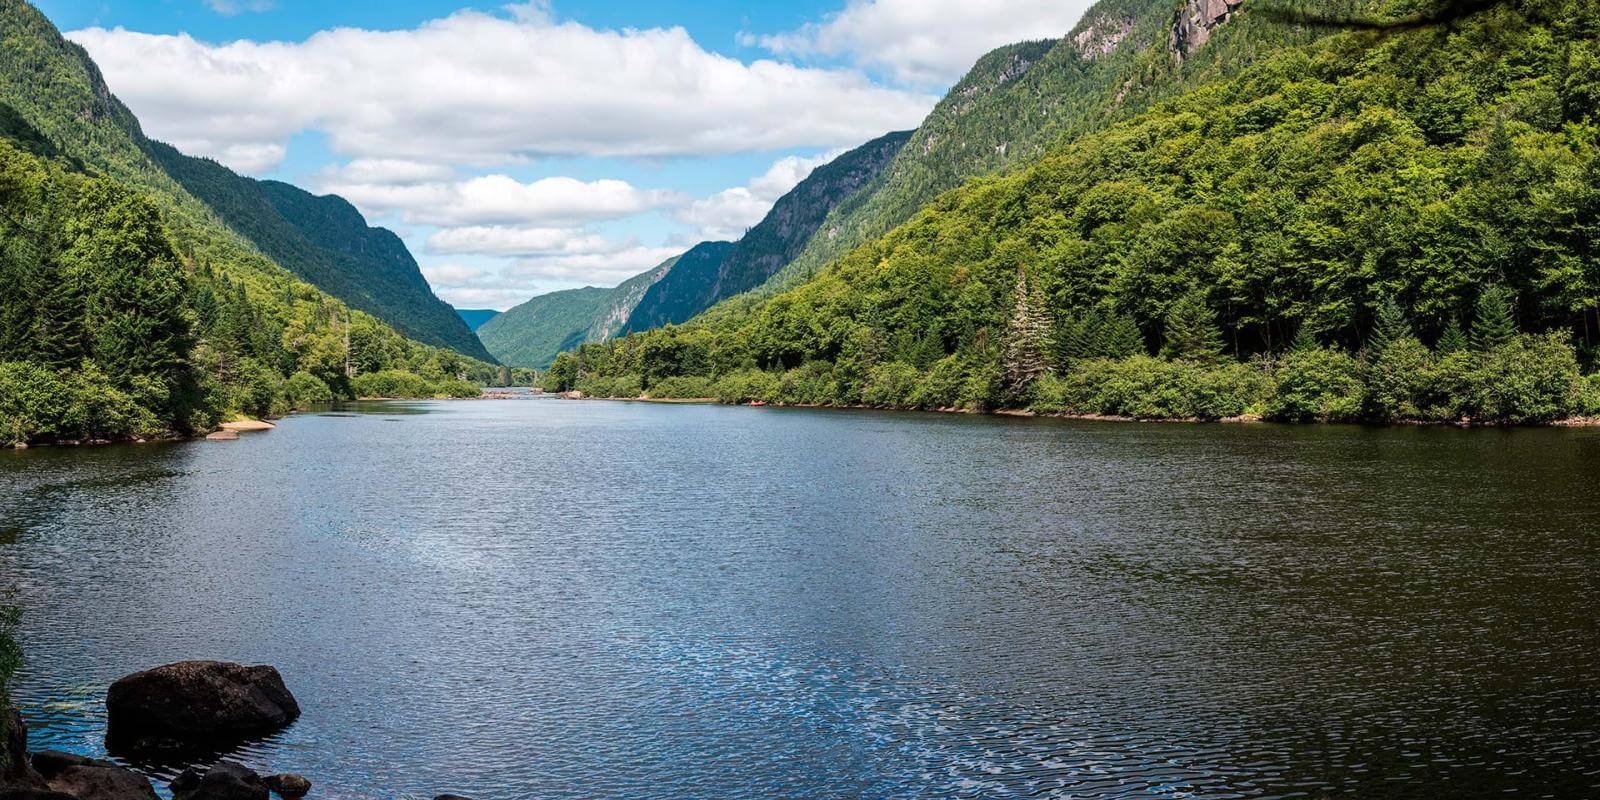 The Jacques-Cartier River, deep in the valley, in Jacques-Cartier National Park.